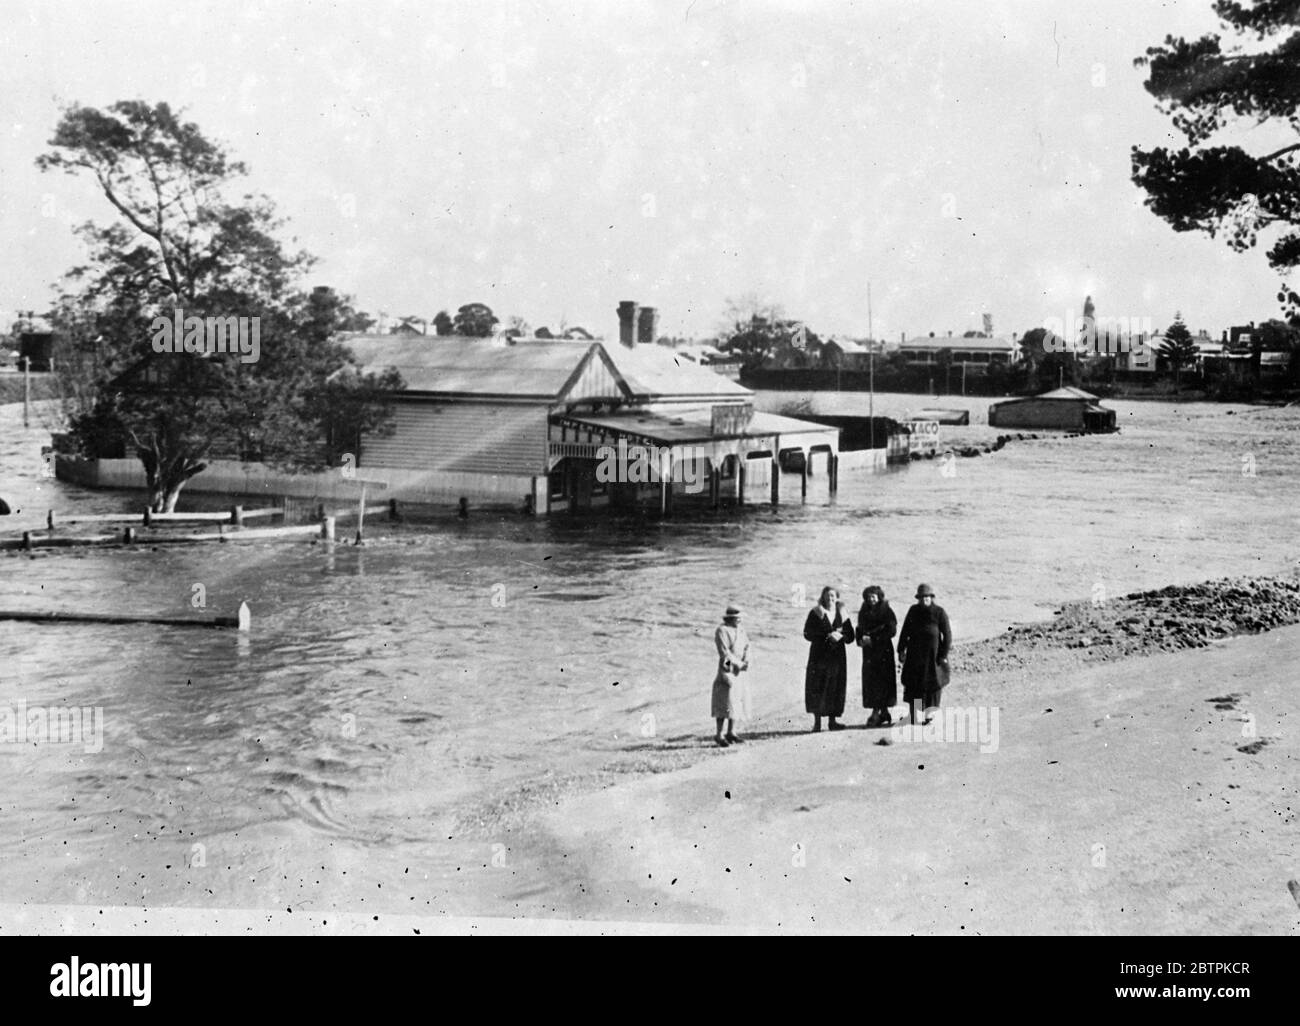 Flood Menace In Australia . Thousands Of Pounds Damage Follows Heavy Rains . Heavy rains have caused serious floods in the Eastern Gippsland district of Victoria , Australia . Thousands of pounds worth of damage has been caused to roads , livestock , homes and bridges . Many buildings have been submerged to the roof . Photo shows : Flood waters swirling around the Imperial Hotel at Bairnsdale , Eastern Gippsland . 13 Jul 1936 Stock Photo